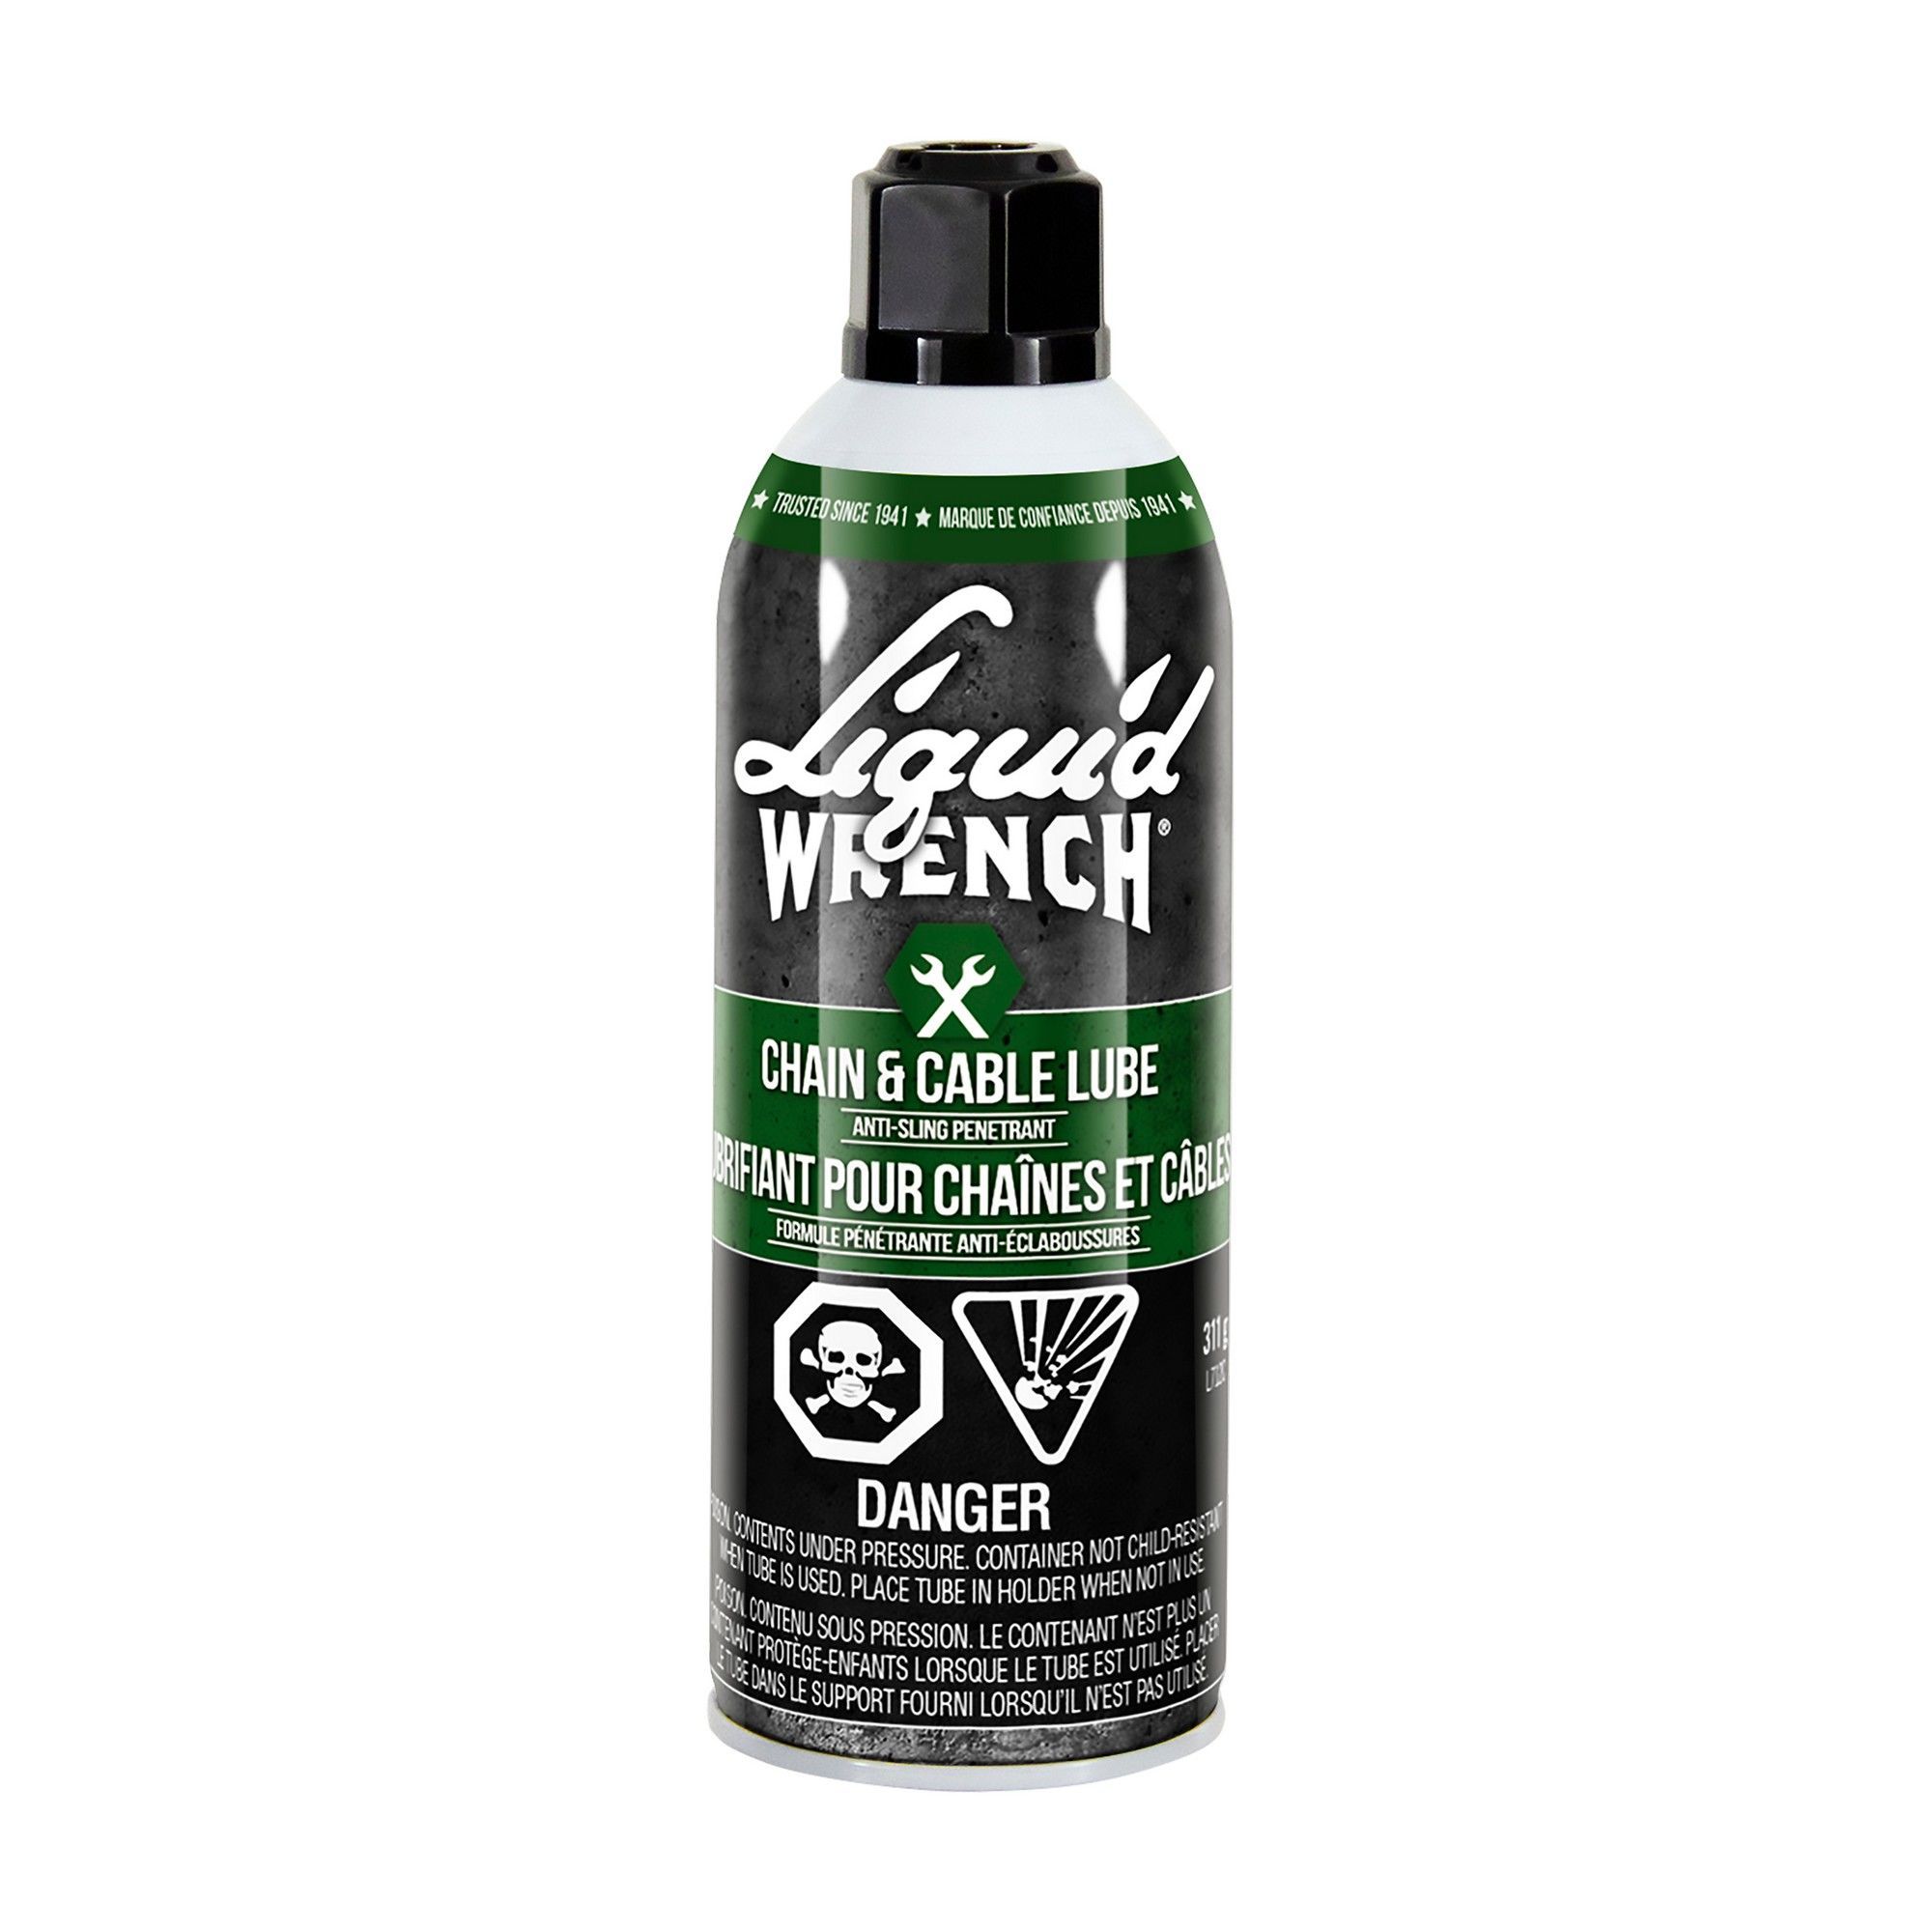 Chain & Cable lube from LIQUID WRENCH